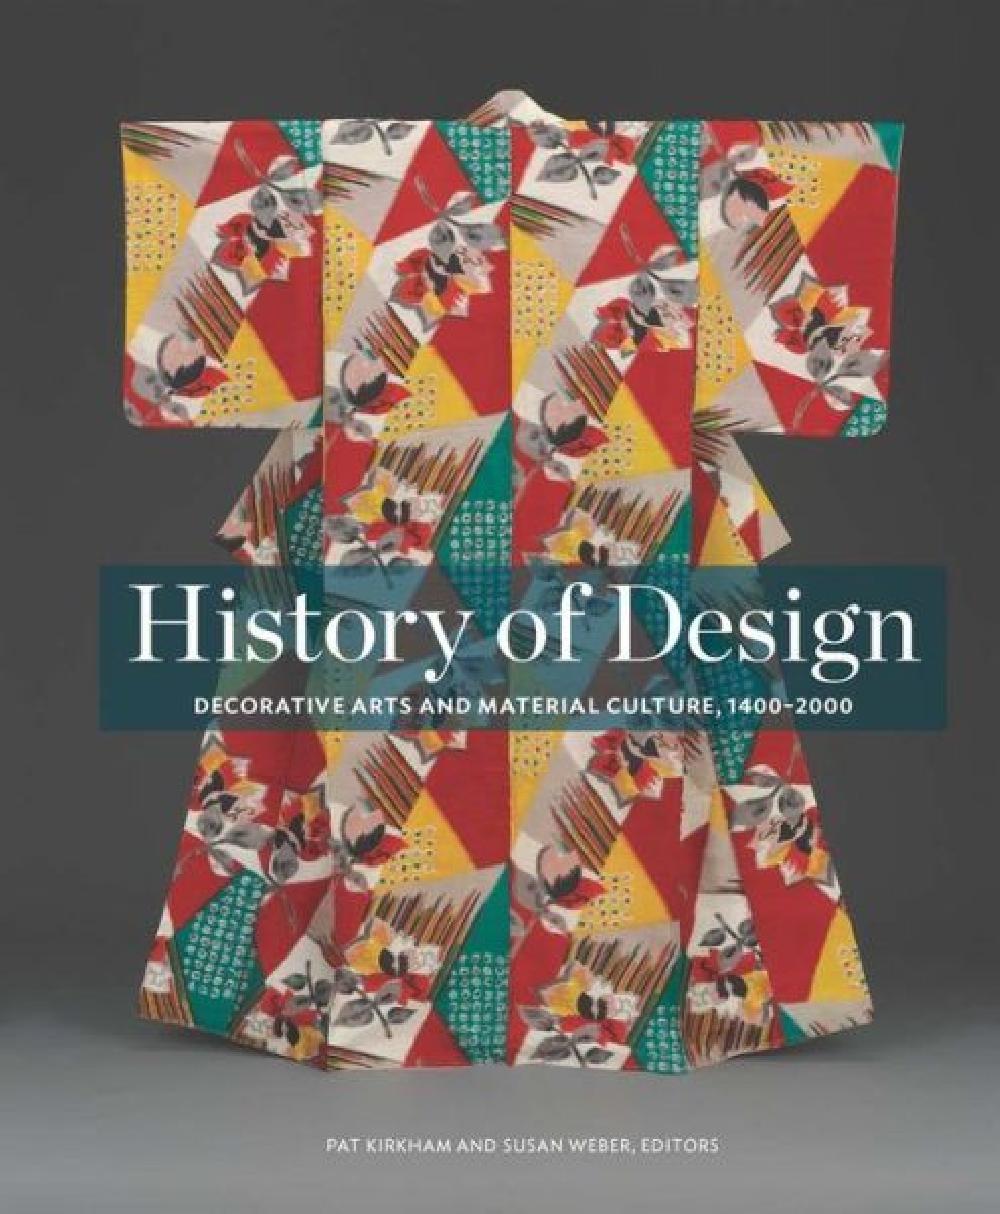 History of Design: Decorative Arts and Material Culture, 1400-2000 